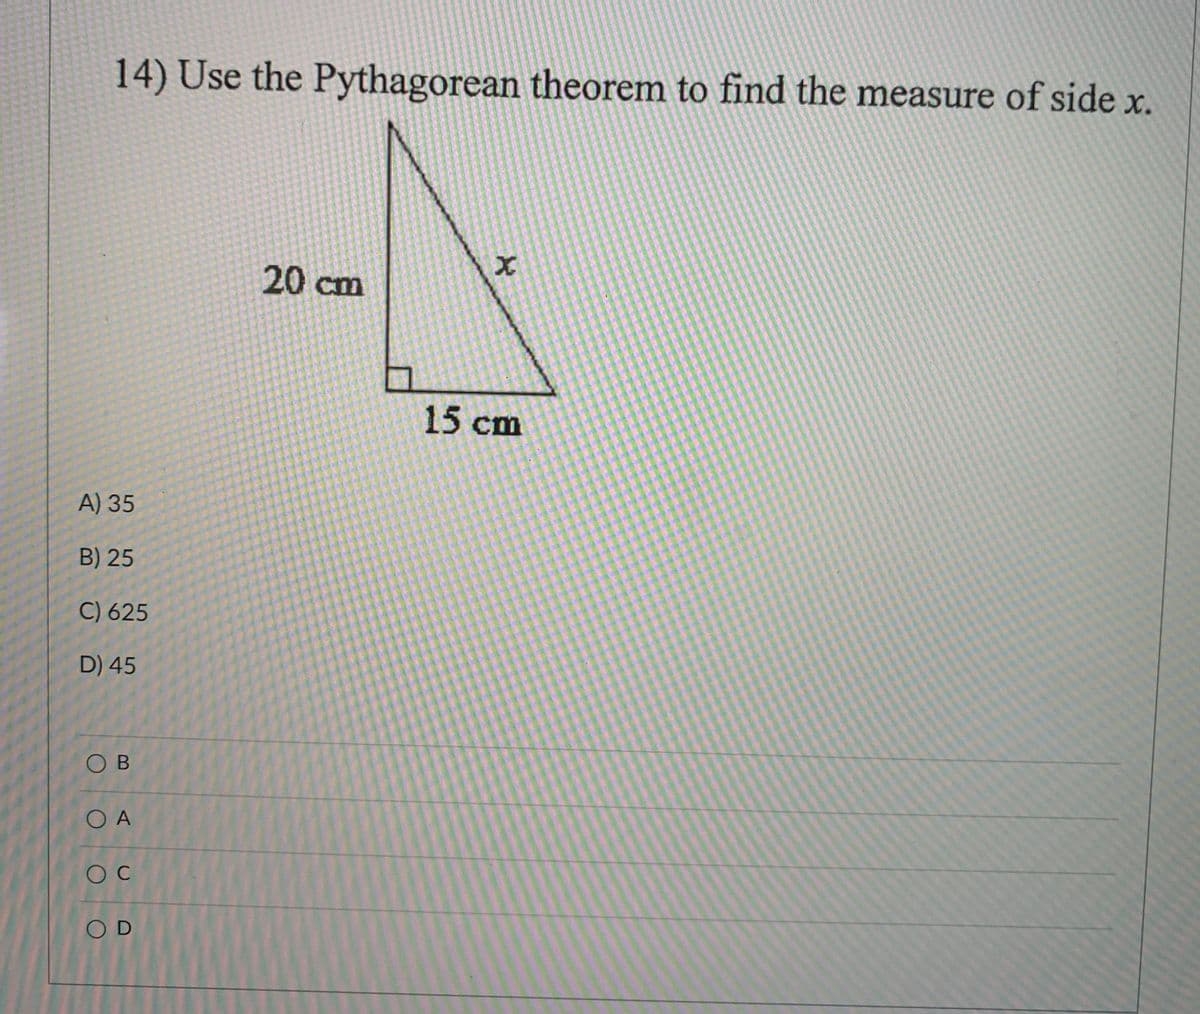 14) Use the Pythagorean theorem to find the measure of side x.
20 cm
15 cm
A) 35
B) 25
C) 625
D) 45
O B
O A
O C
O D
